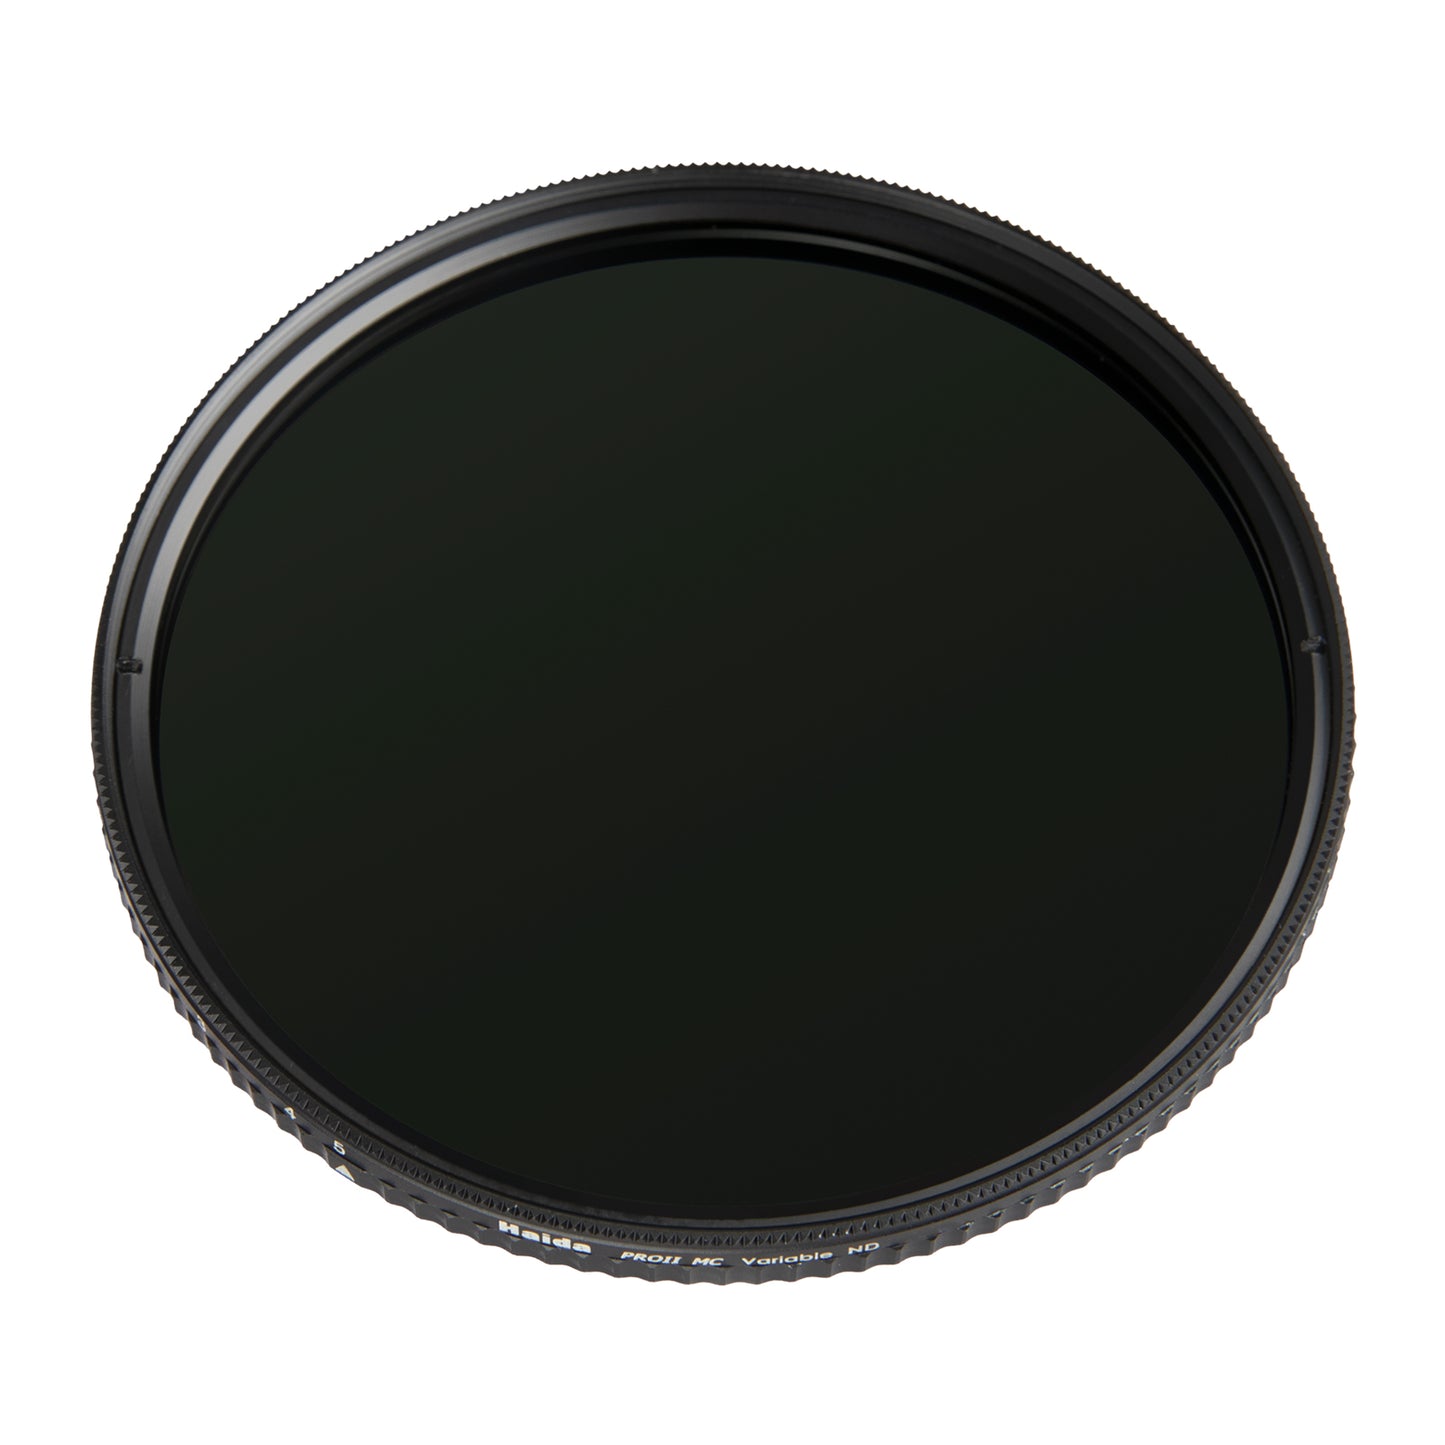 Haida PROII Variable ND Filter Waterproof Scratch Resistant Filter